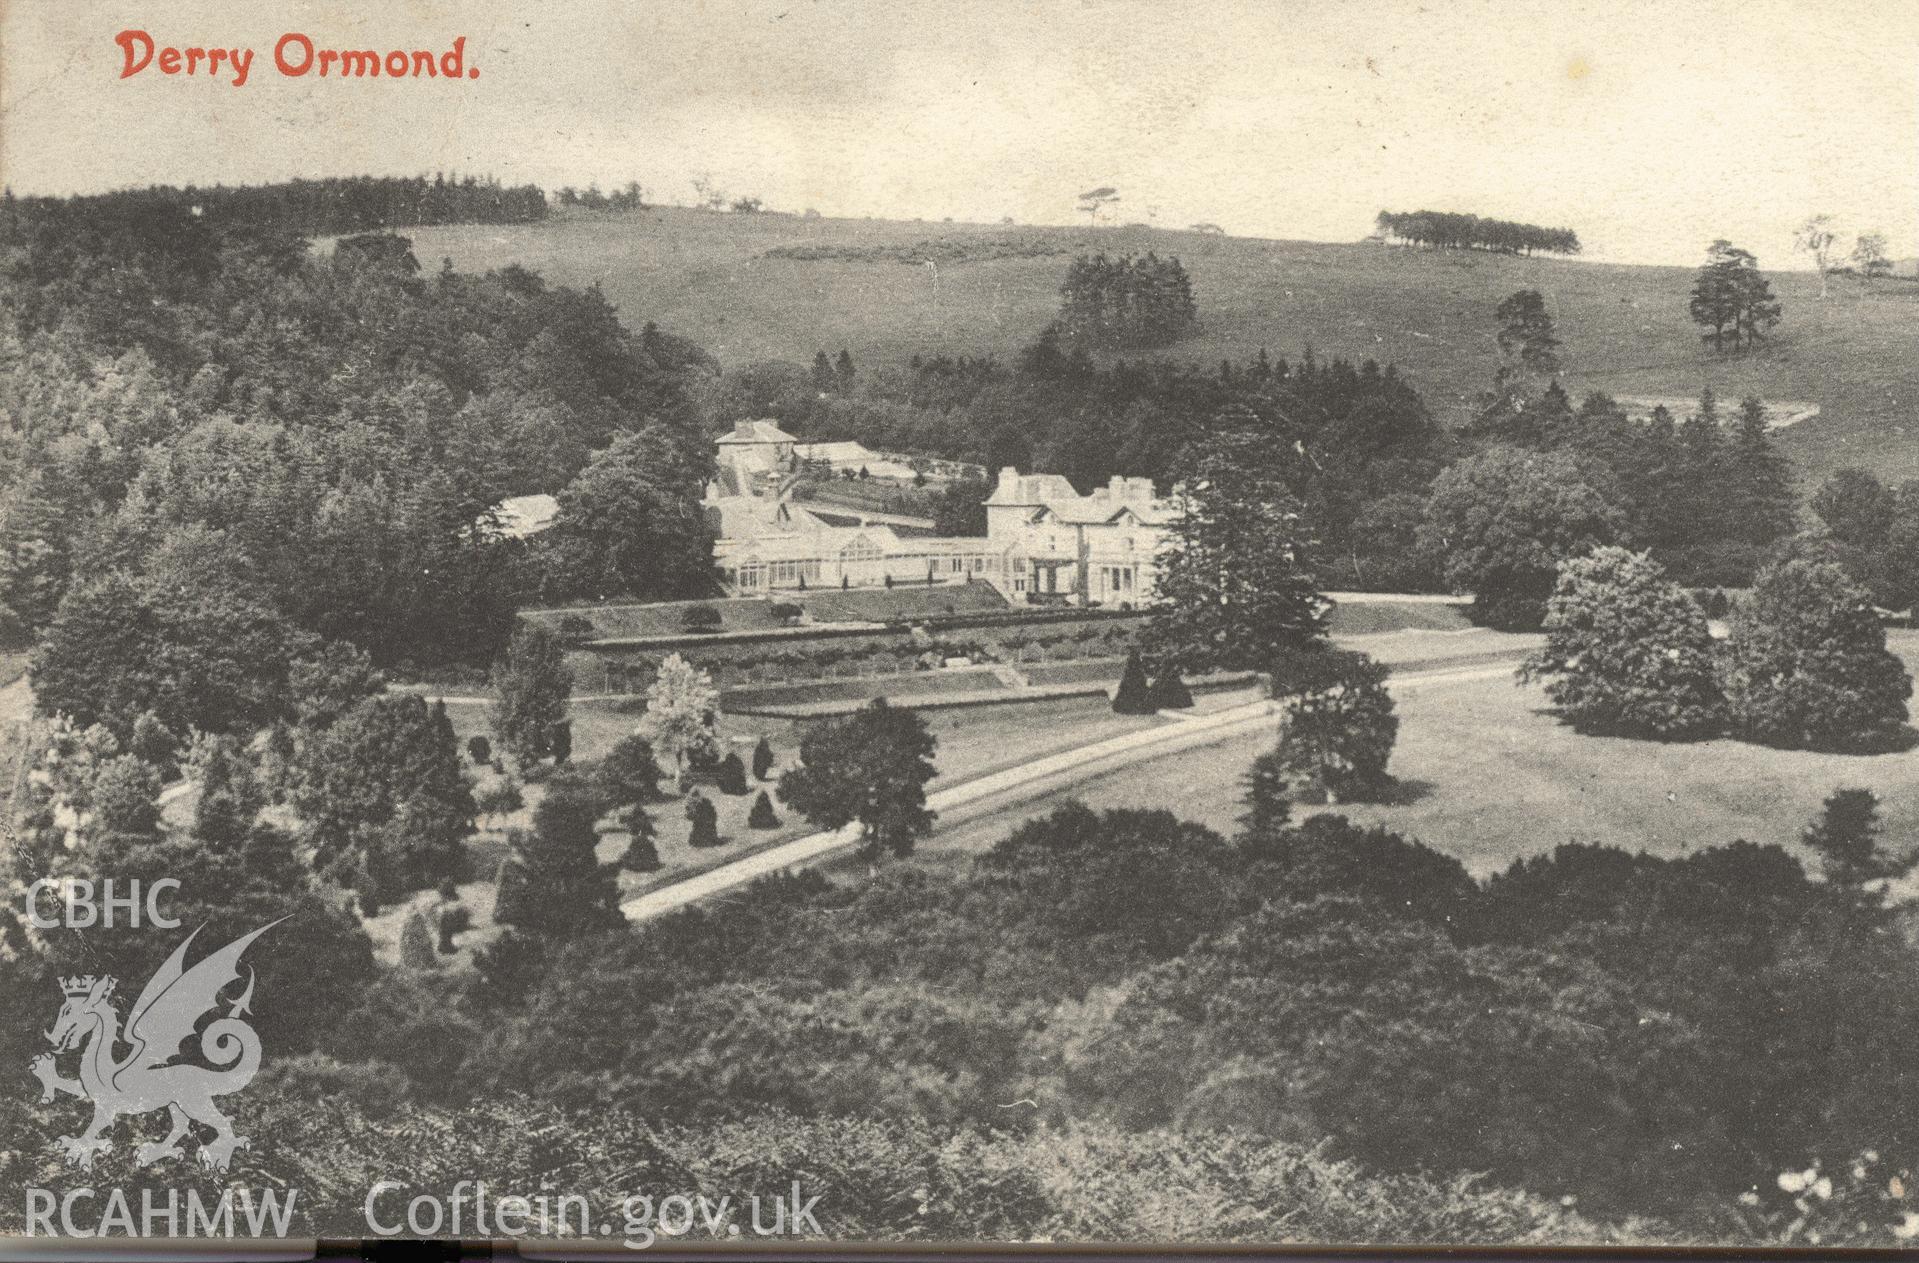 Digitised postcard image of Derry Ormond, Betws Bledrws. Produced by Parks and Gardens Data Services, from an original item in the Peter Davis Collection at Parks and Gardens UK. We hold only web-resolution images of this collection, suitable for viewing on screen and for research purposes only. We do not hold the original images, or publication quality scans.